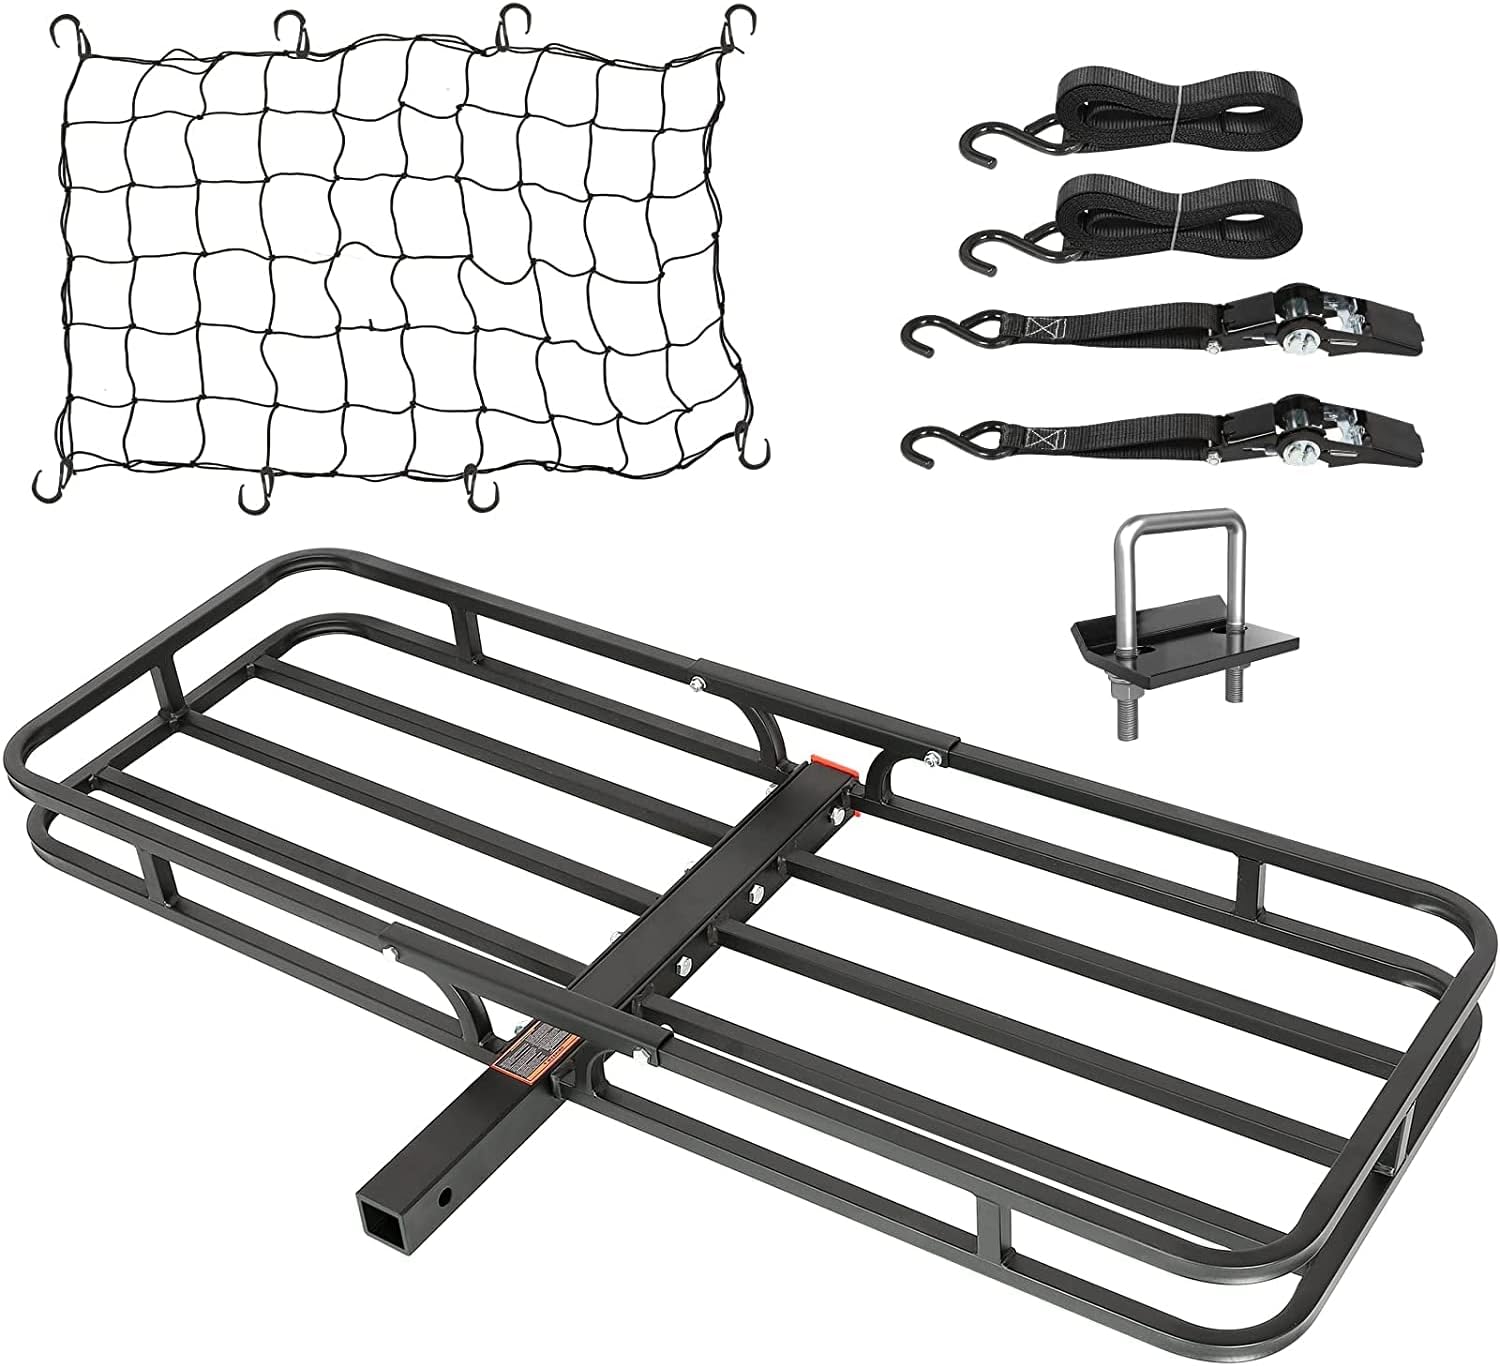 Weize Hitch Cargo Carrier, 53 x 19 x 4-1/8 Inch, 500 lbs Capacity, Compact Hitch Mount Cargo Carrier with Net, Strap and Hitch Tighte